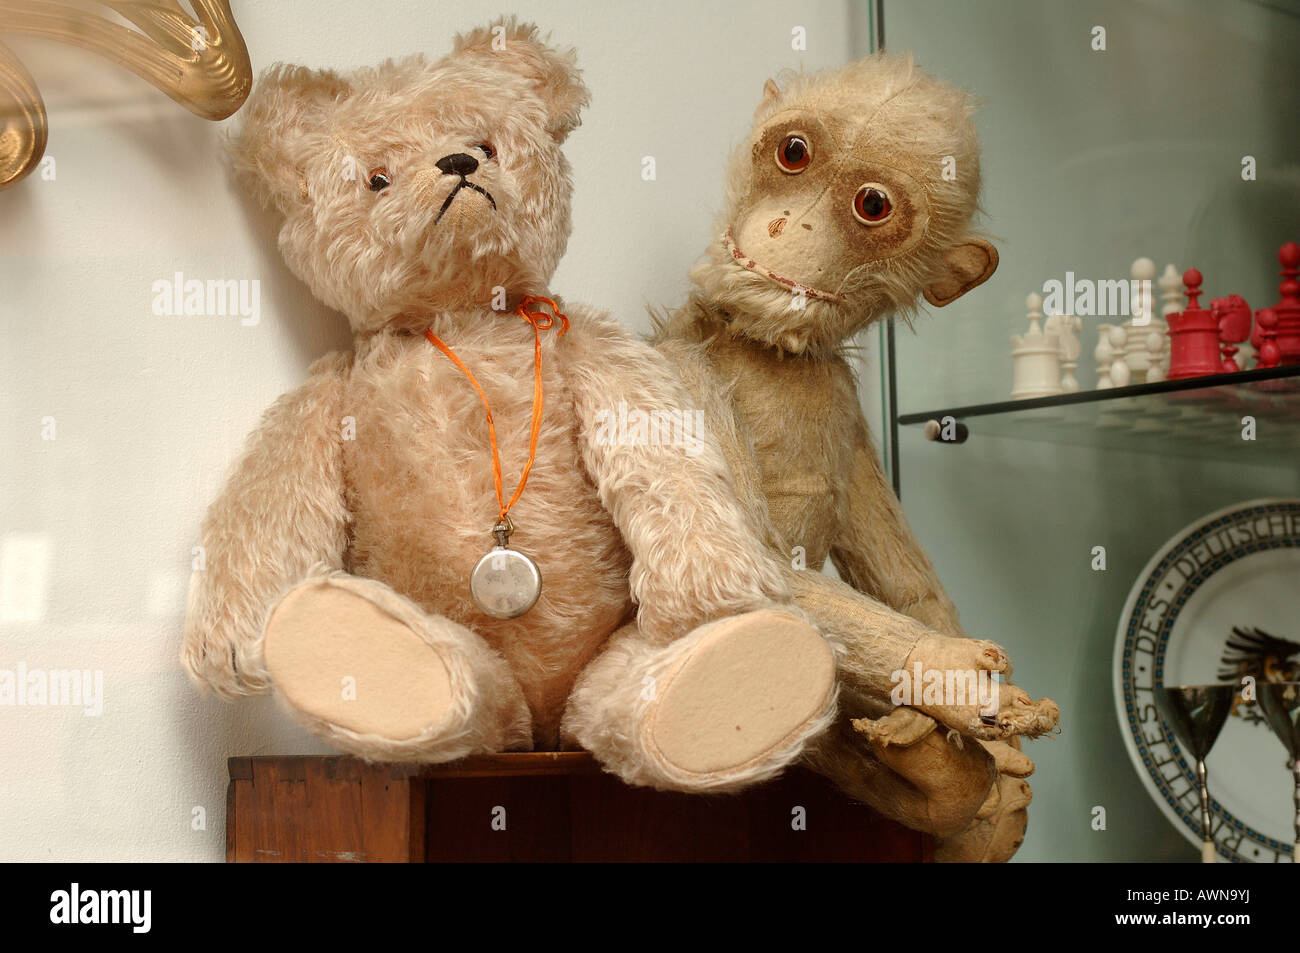 Two old, worn stuffed animals (teddy bear and monkey plush toy) at an antiques shop in Nuremburg, Middle Franconia, Bavaria, Ge Stock Photo